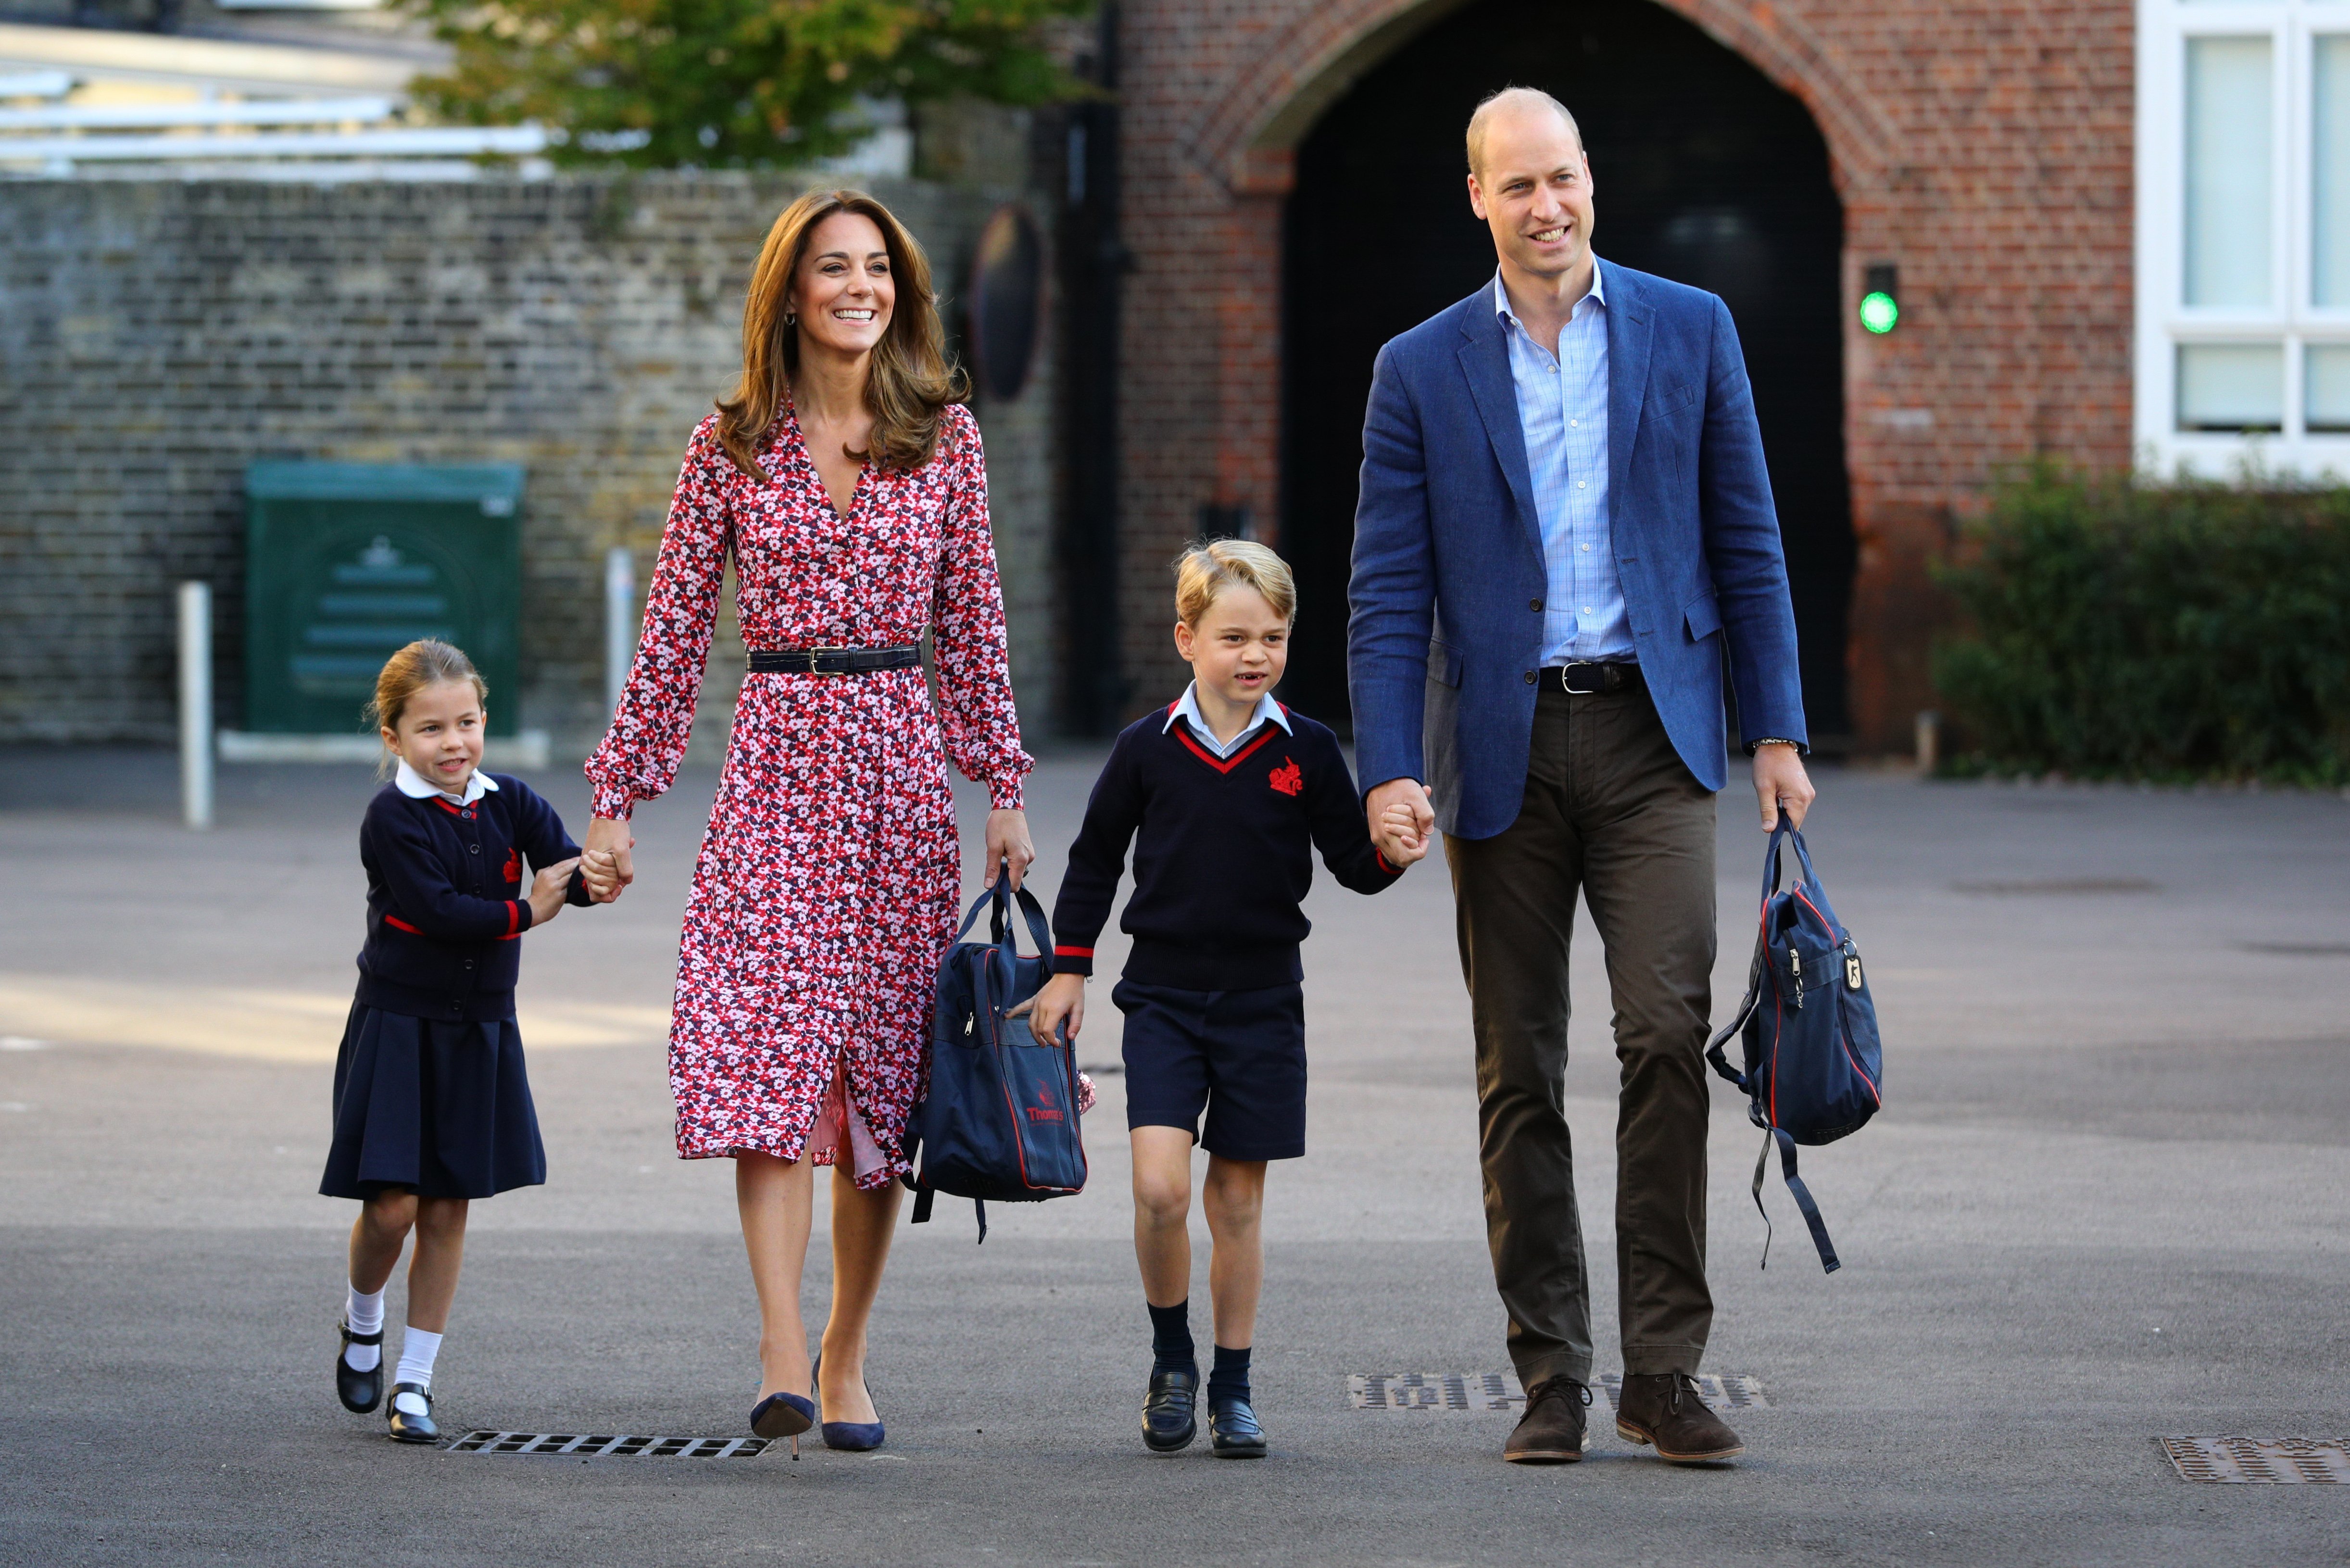 Prince William and Kate Middleton take Prince George and Princess Charlotte to school in London on September 5, 2019, in London, England. | Source: Getty Images.